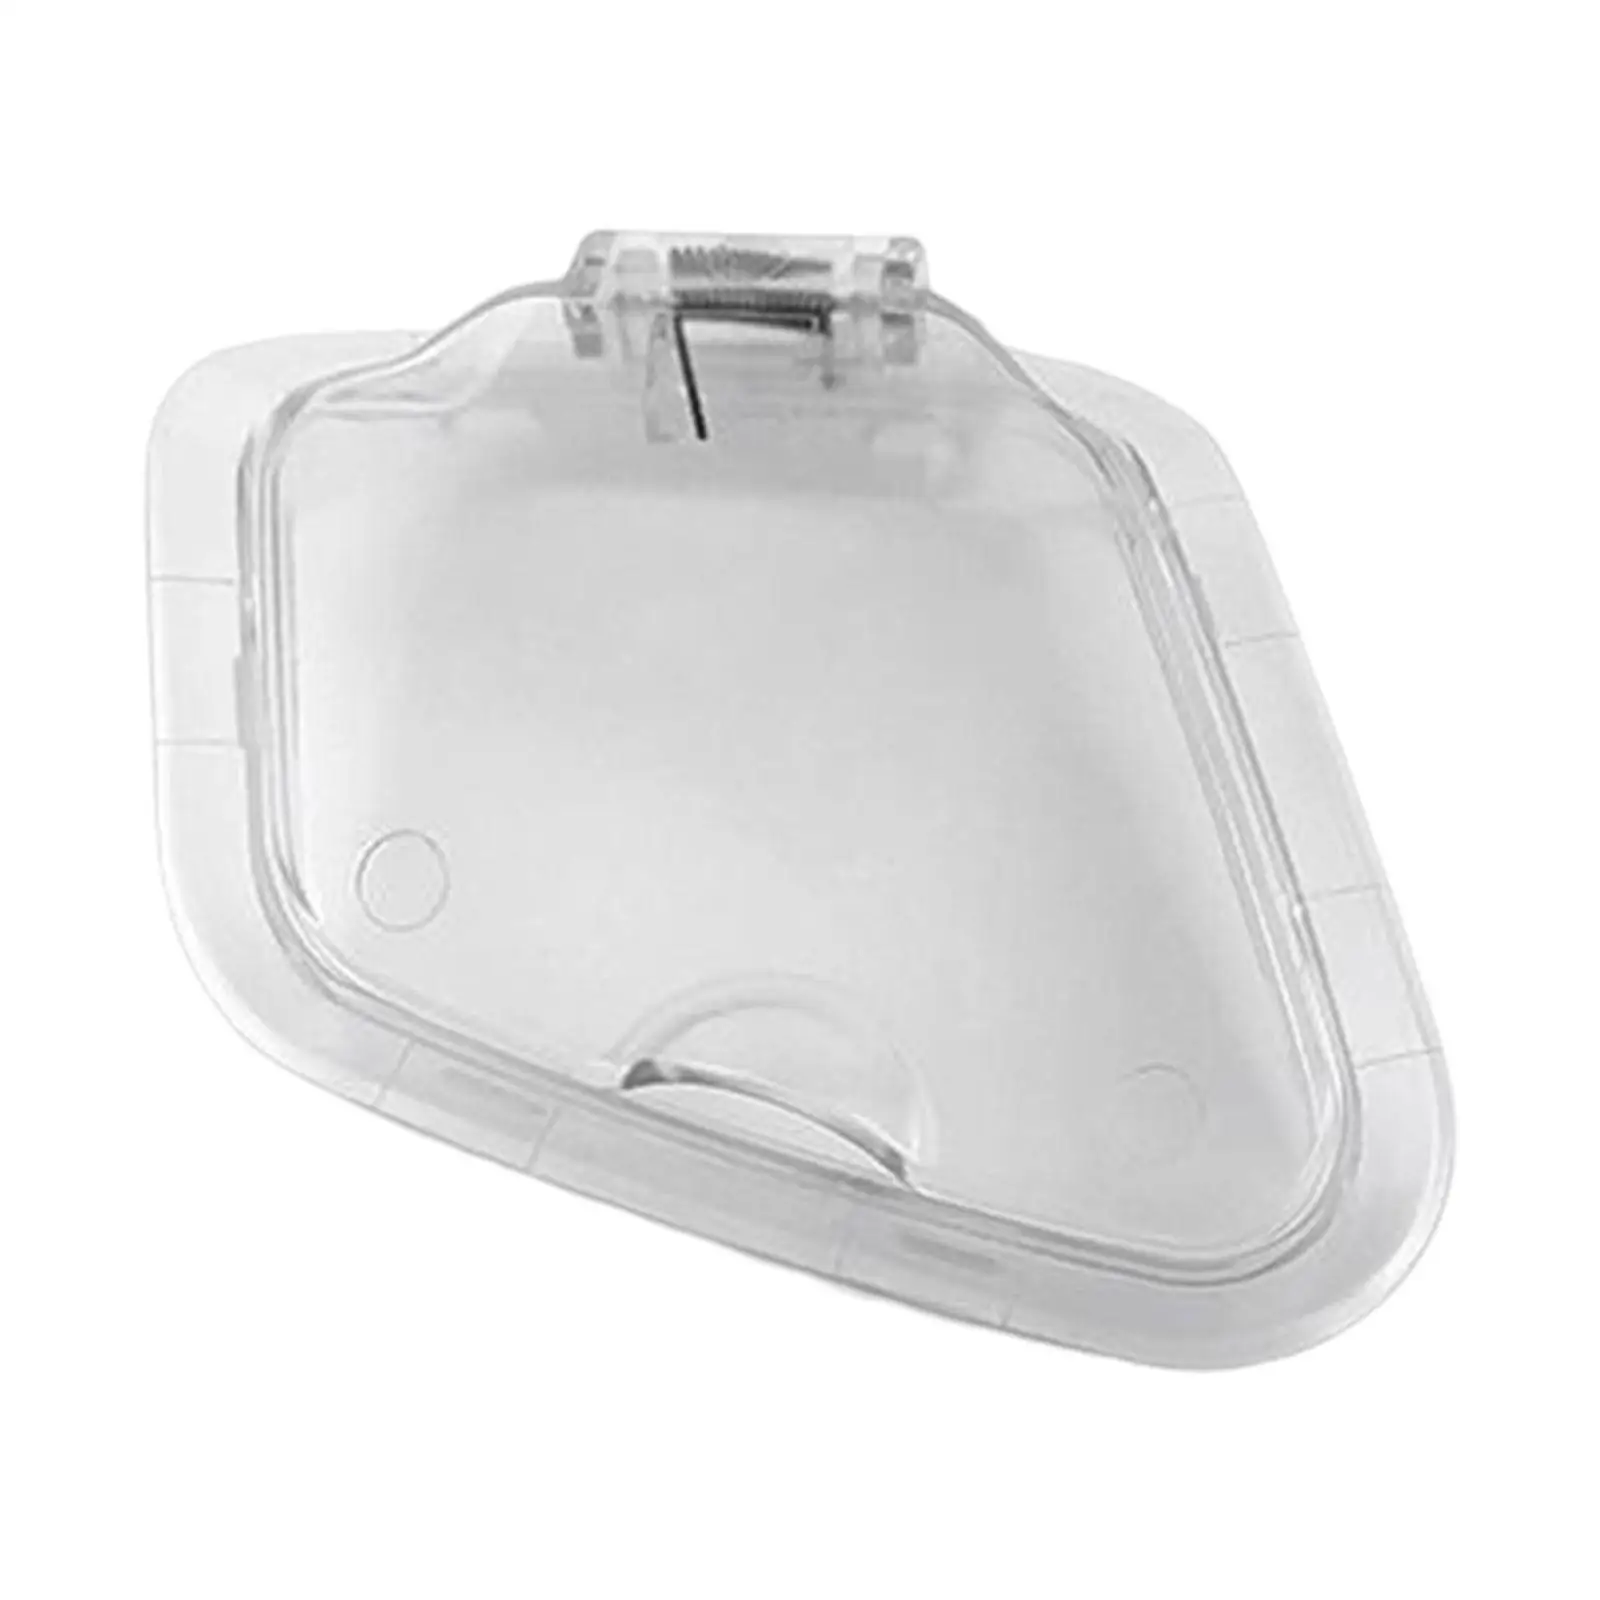 Professional Side Pocket Cover Lid for Yamaha Nmax 20/22 Spare Parts